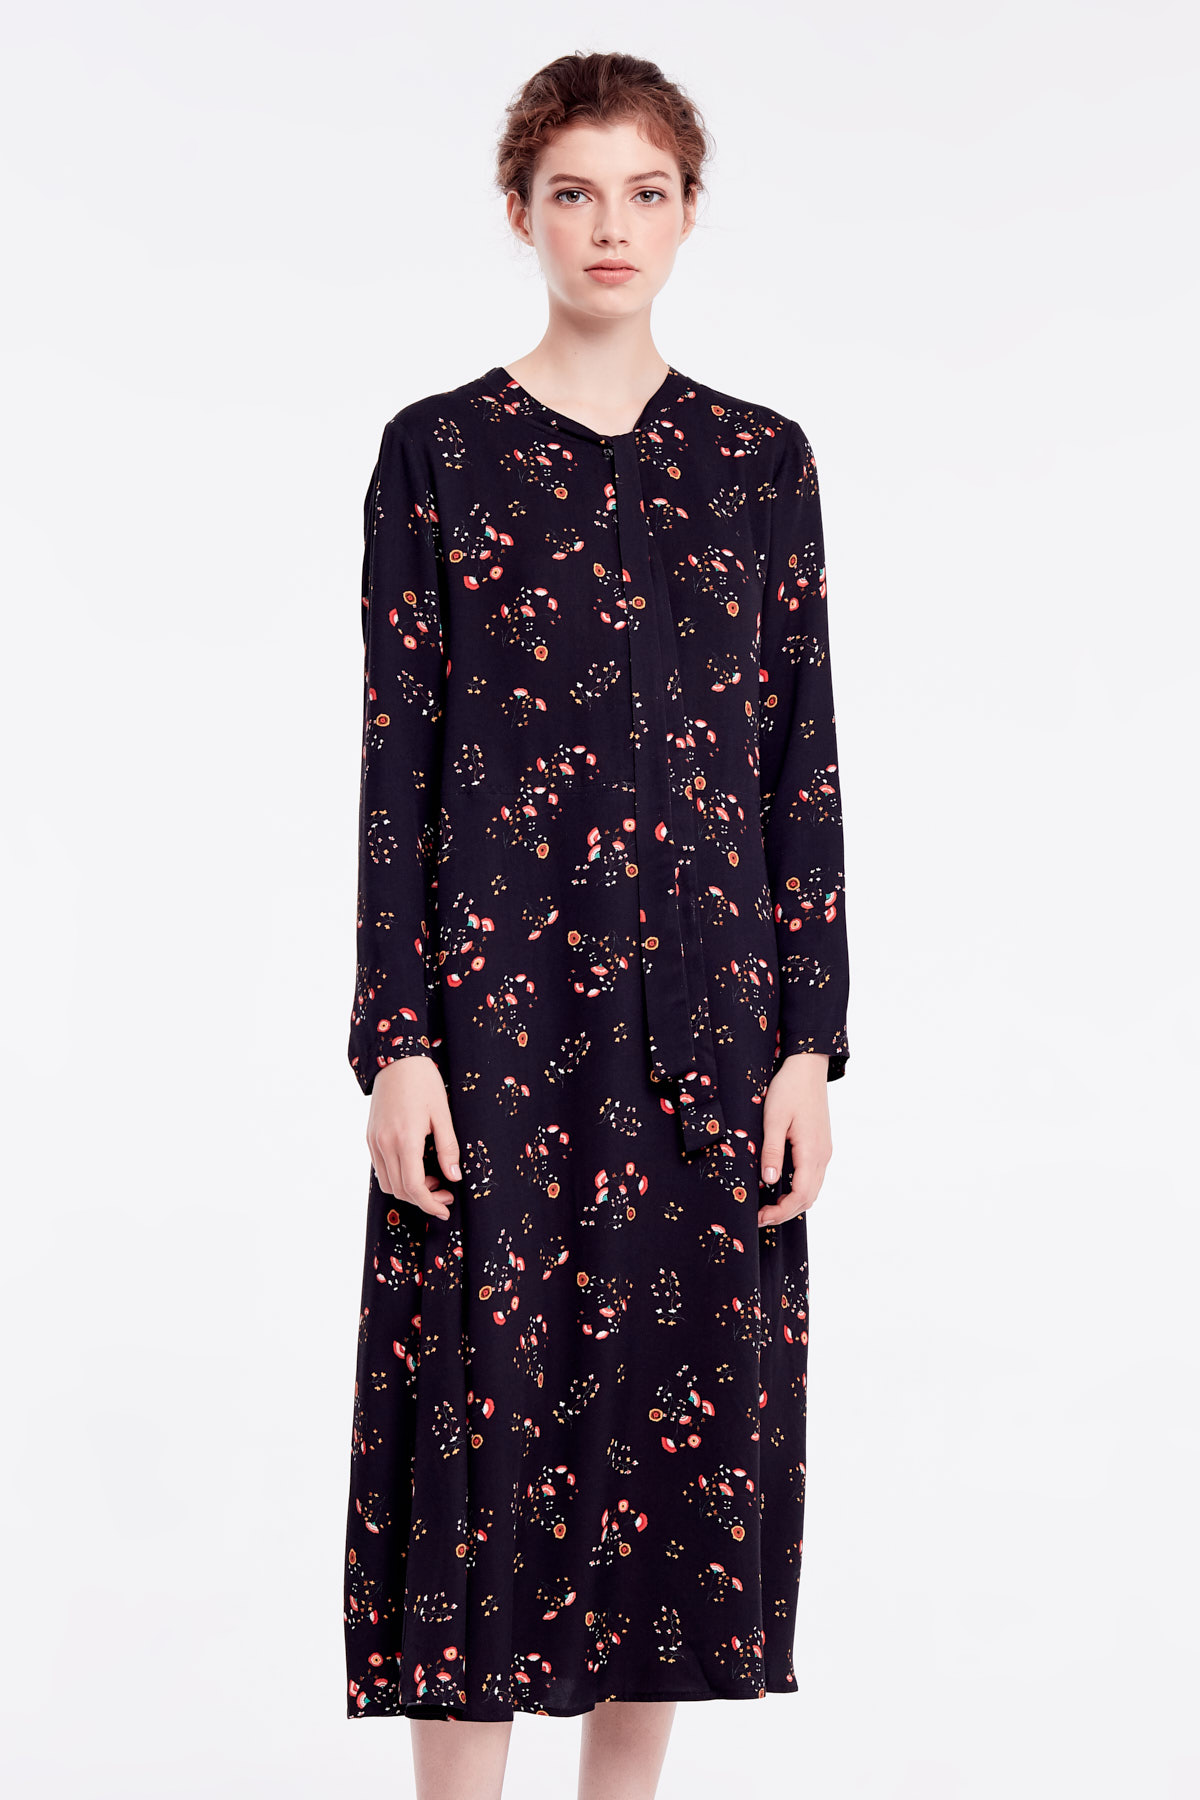 Midi black floral dress with a bow , photo 2